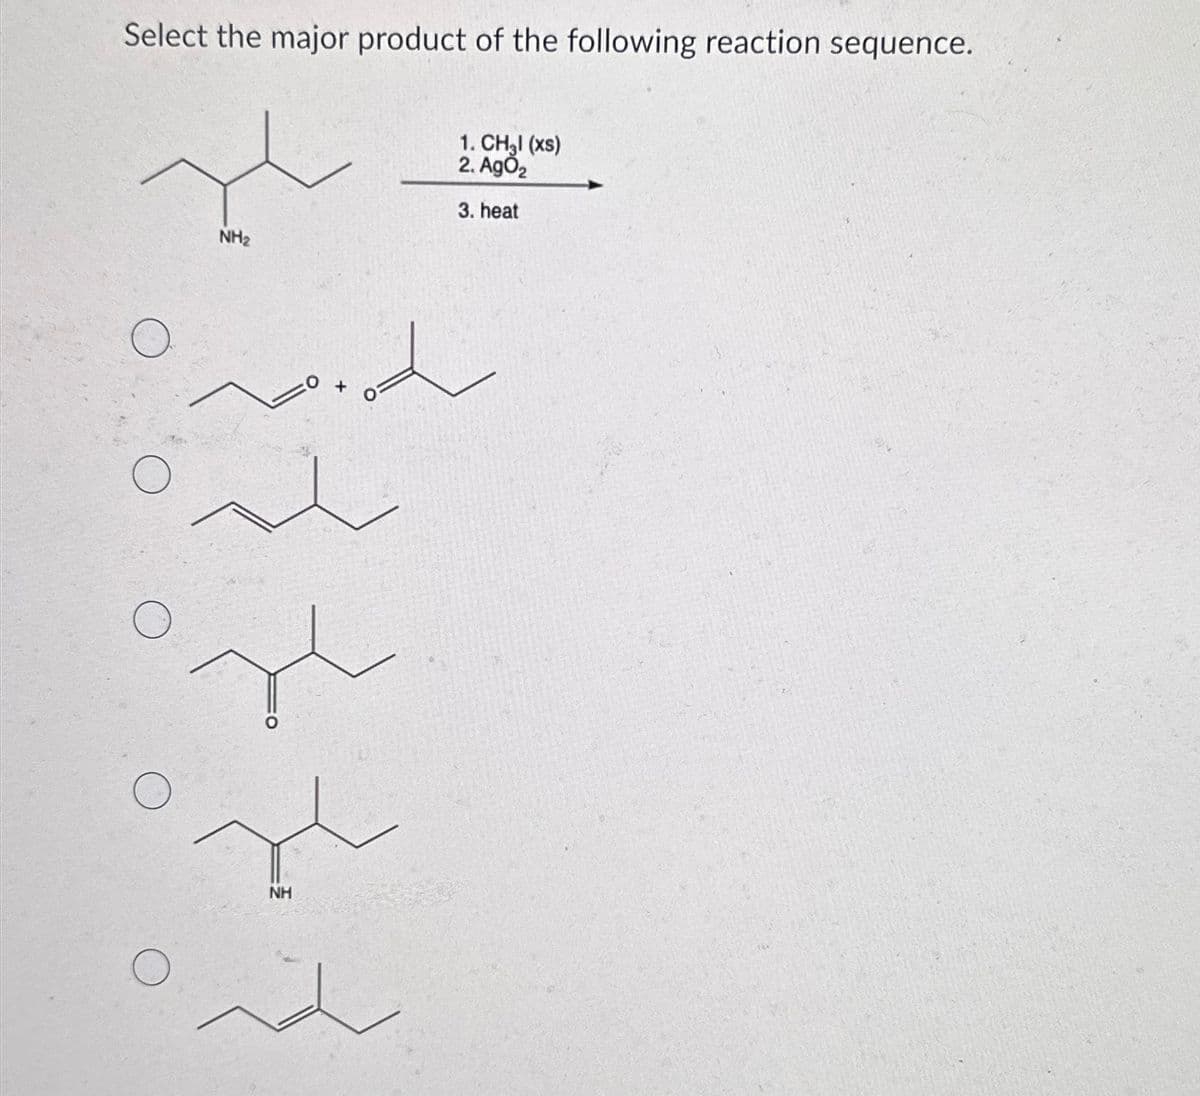 Select the major product of the following reaction sequence.
NH2
NH
1. CH3l (xs)
2. Ago2
3. heat